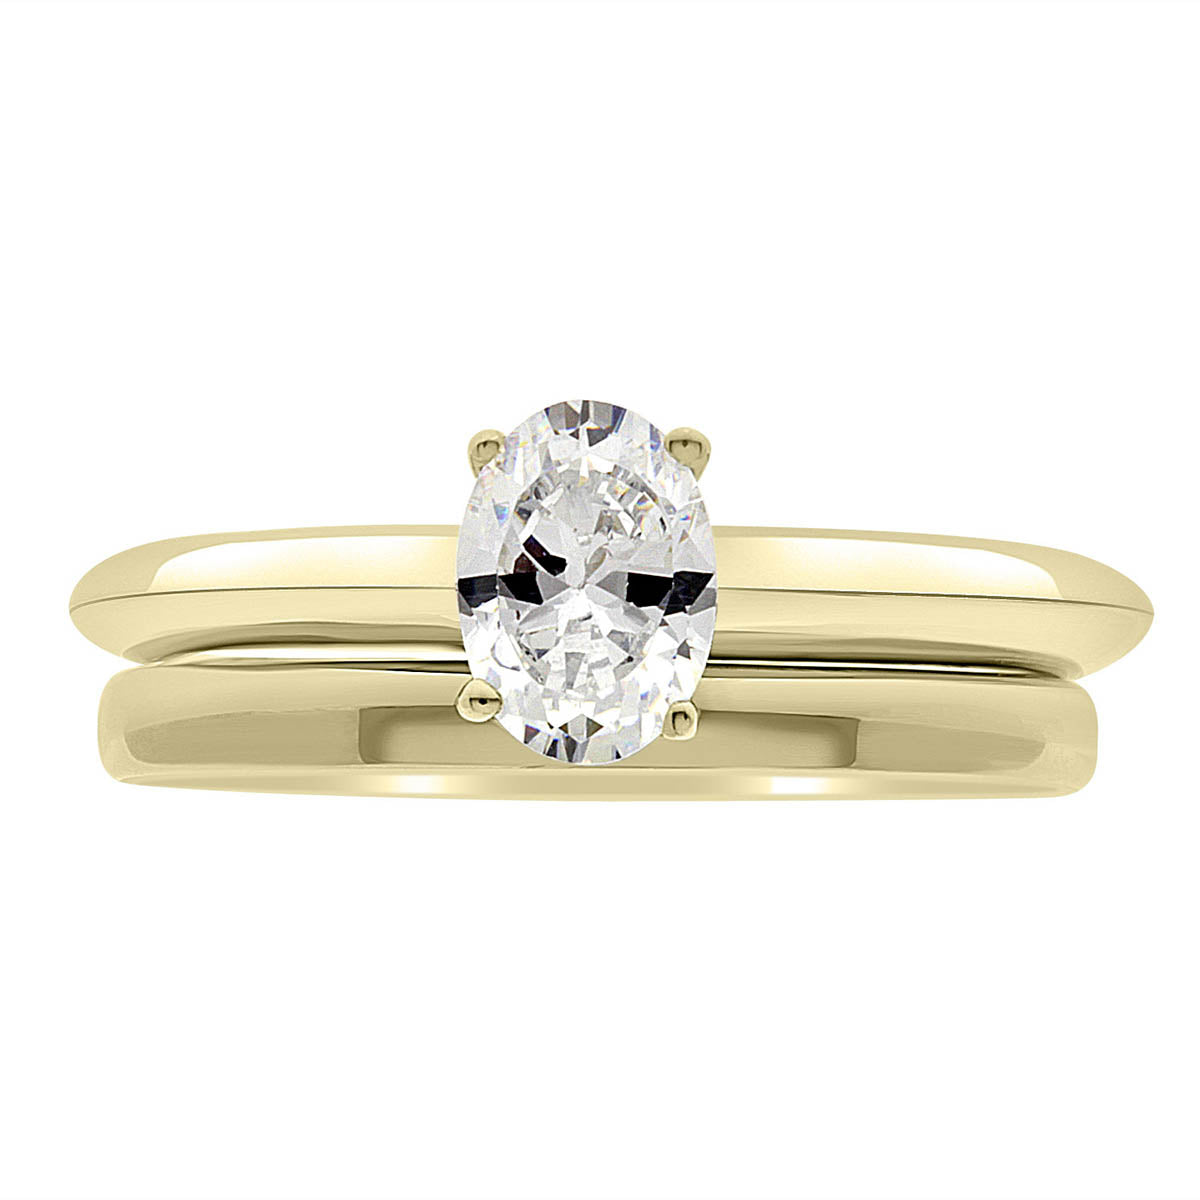 Knife Edge Band Engagement Ring in yellow gold metal with a matching plain gold wedding ring